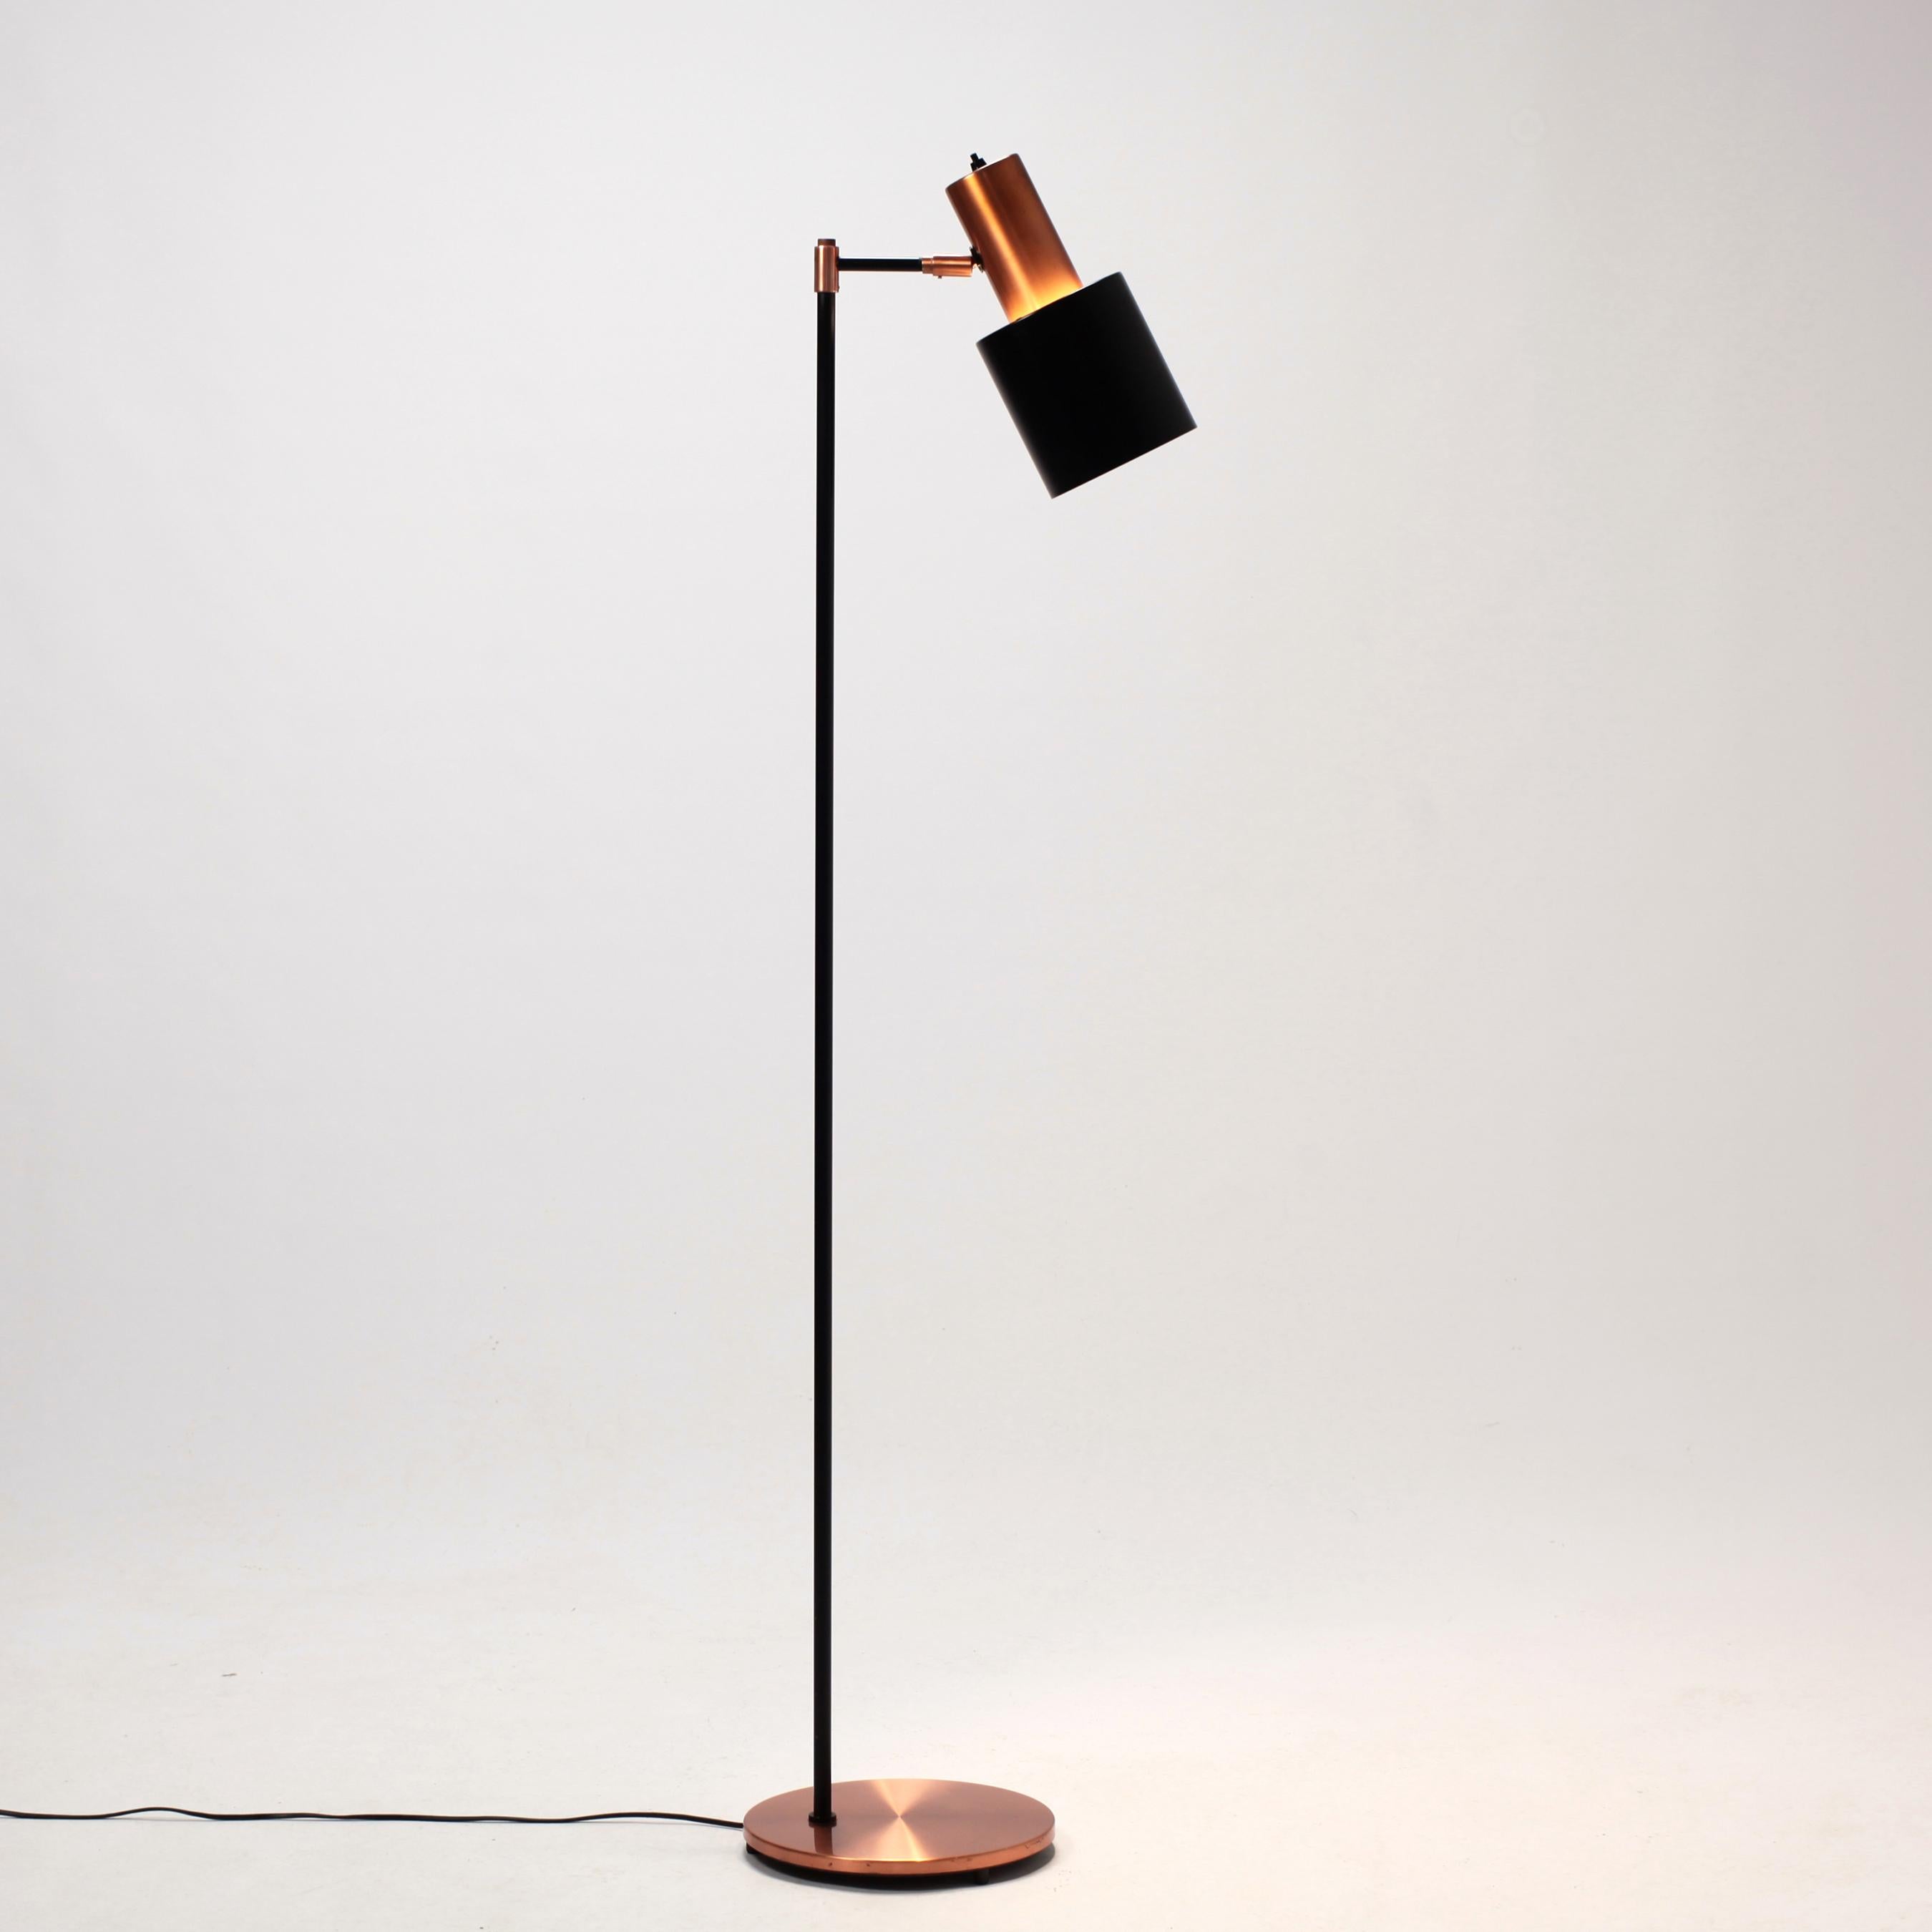 Studio copper floor lamp designed by Jo Hammerborg in the mid-1960s and produced by Fog & Mørup.
E27 bulb with flexible rotating head.
Good condition with some wear consistent with age and use.